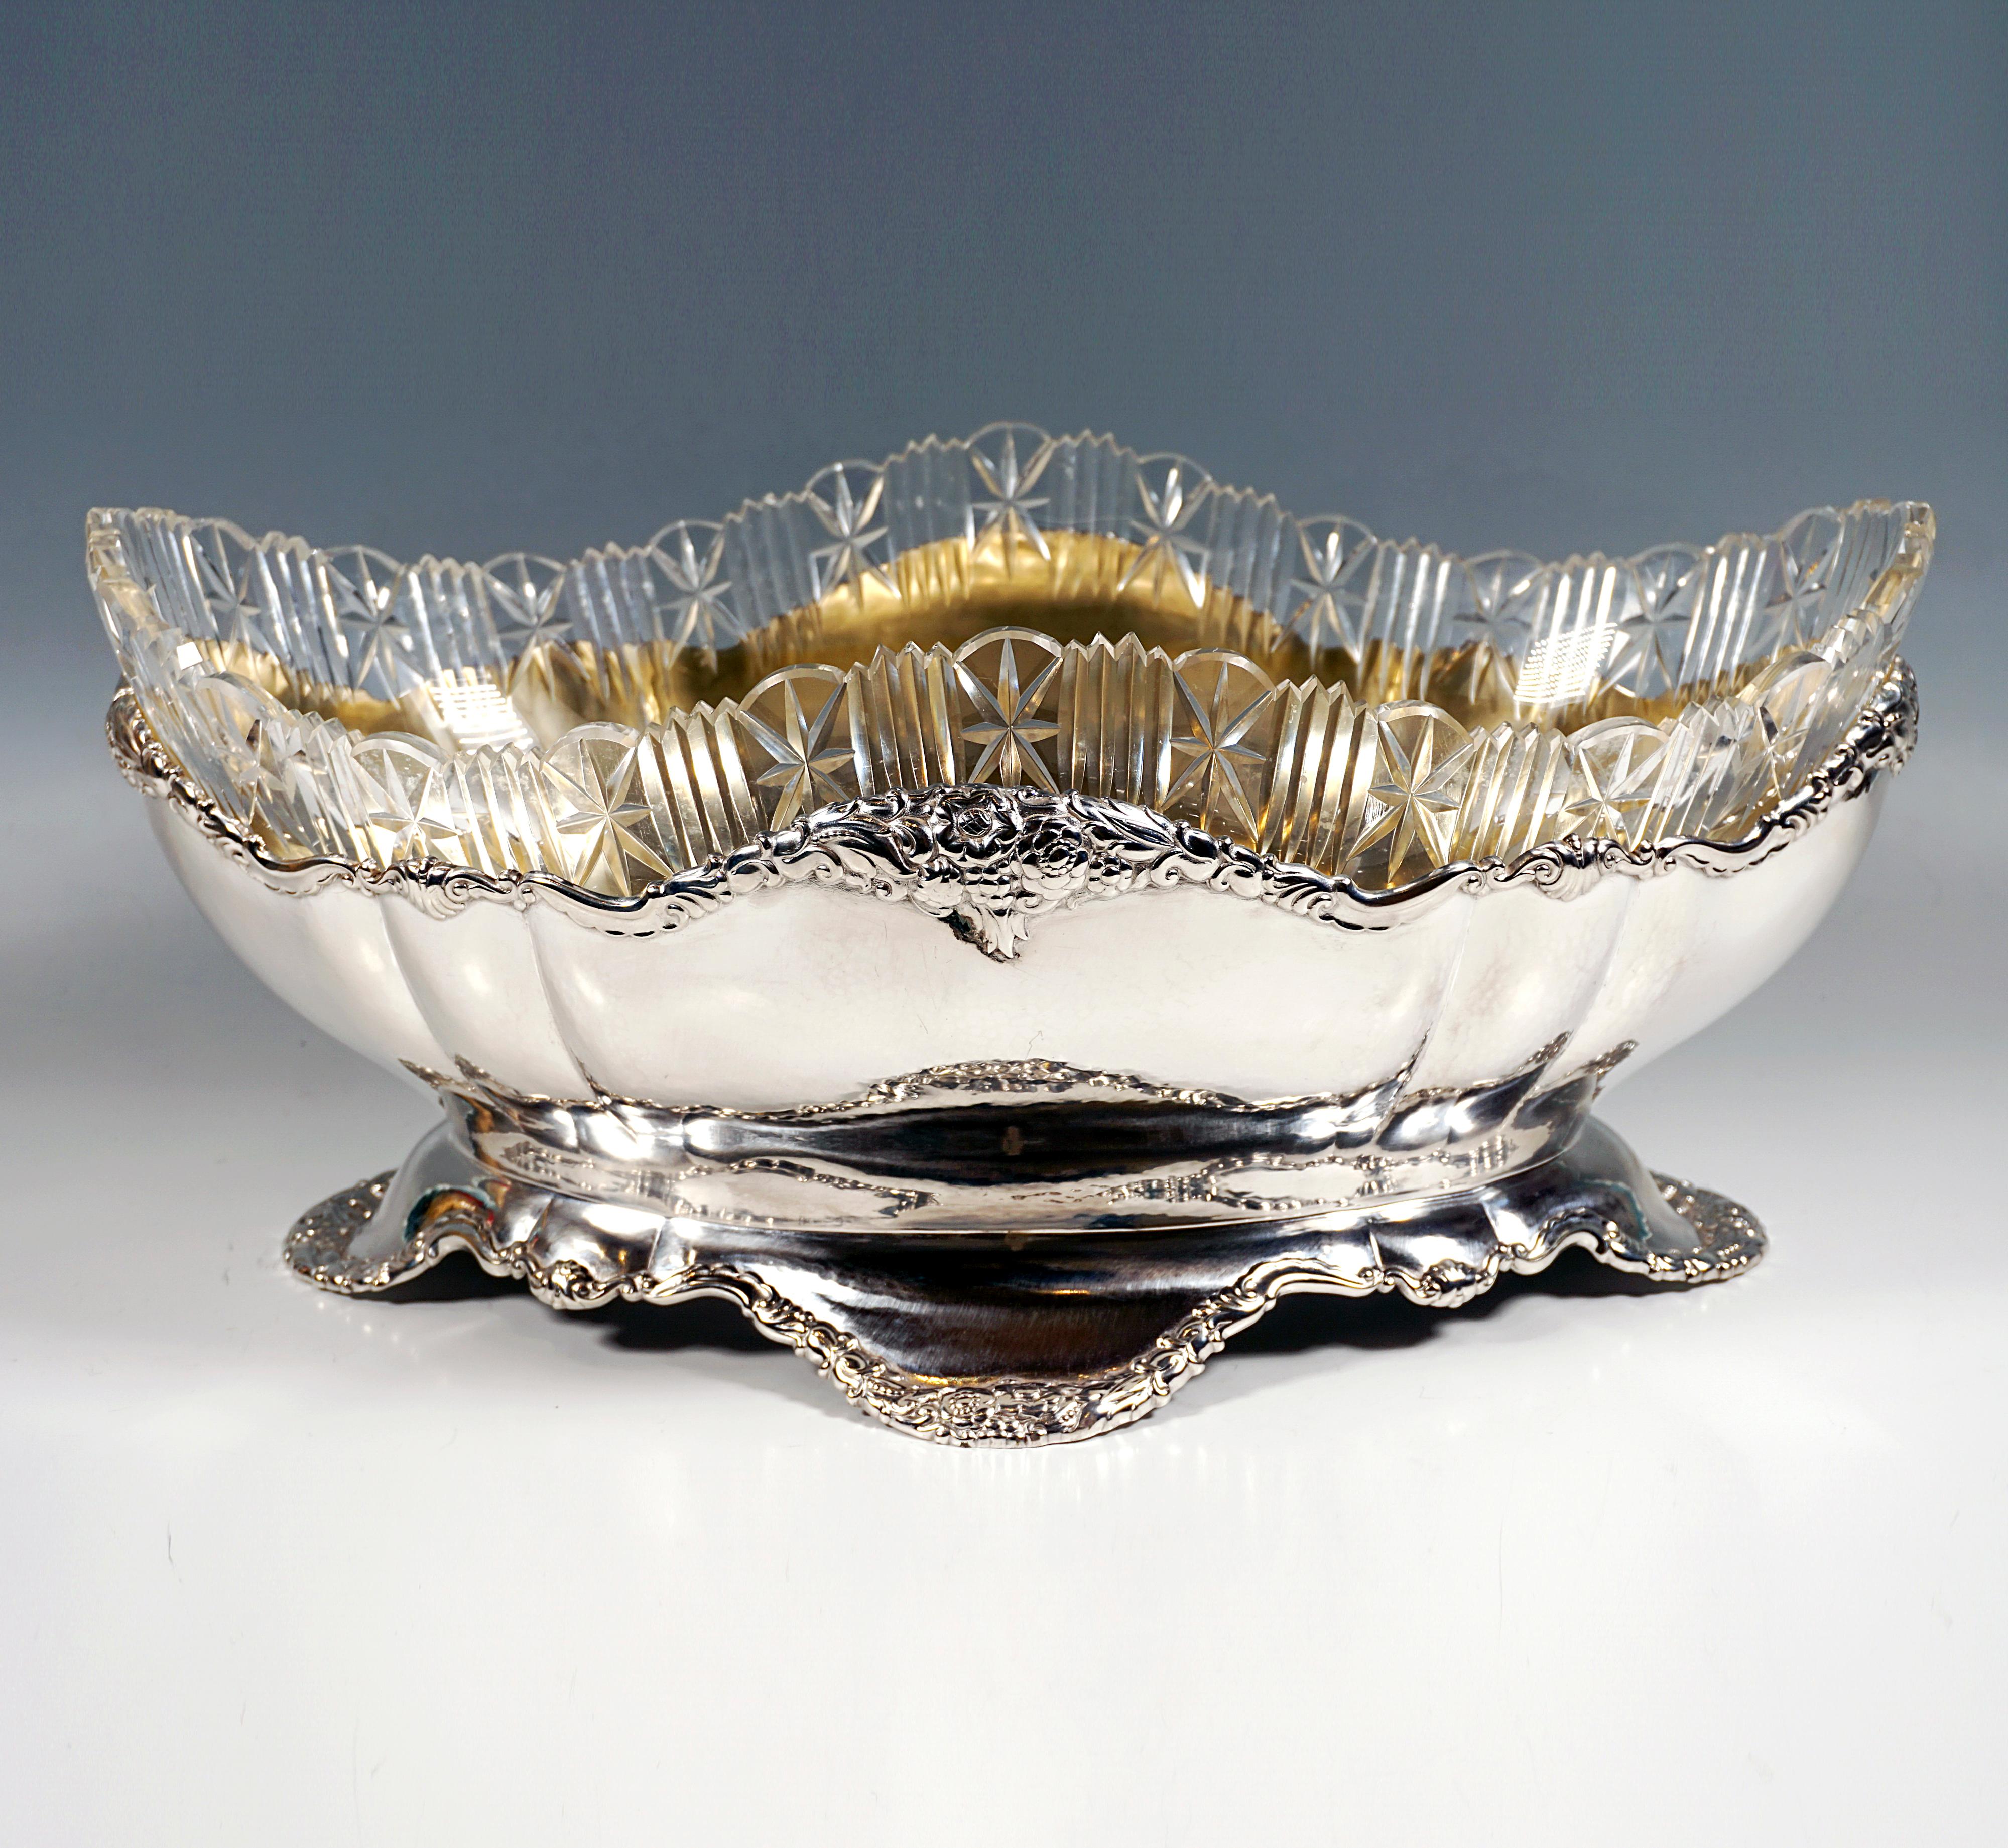 Art Nouveau Silver Jardinière With Cut Glass Liner, Theodor Müller Germany c1900 For Sale 1